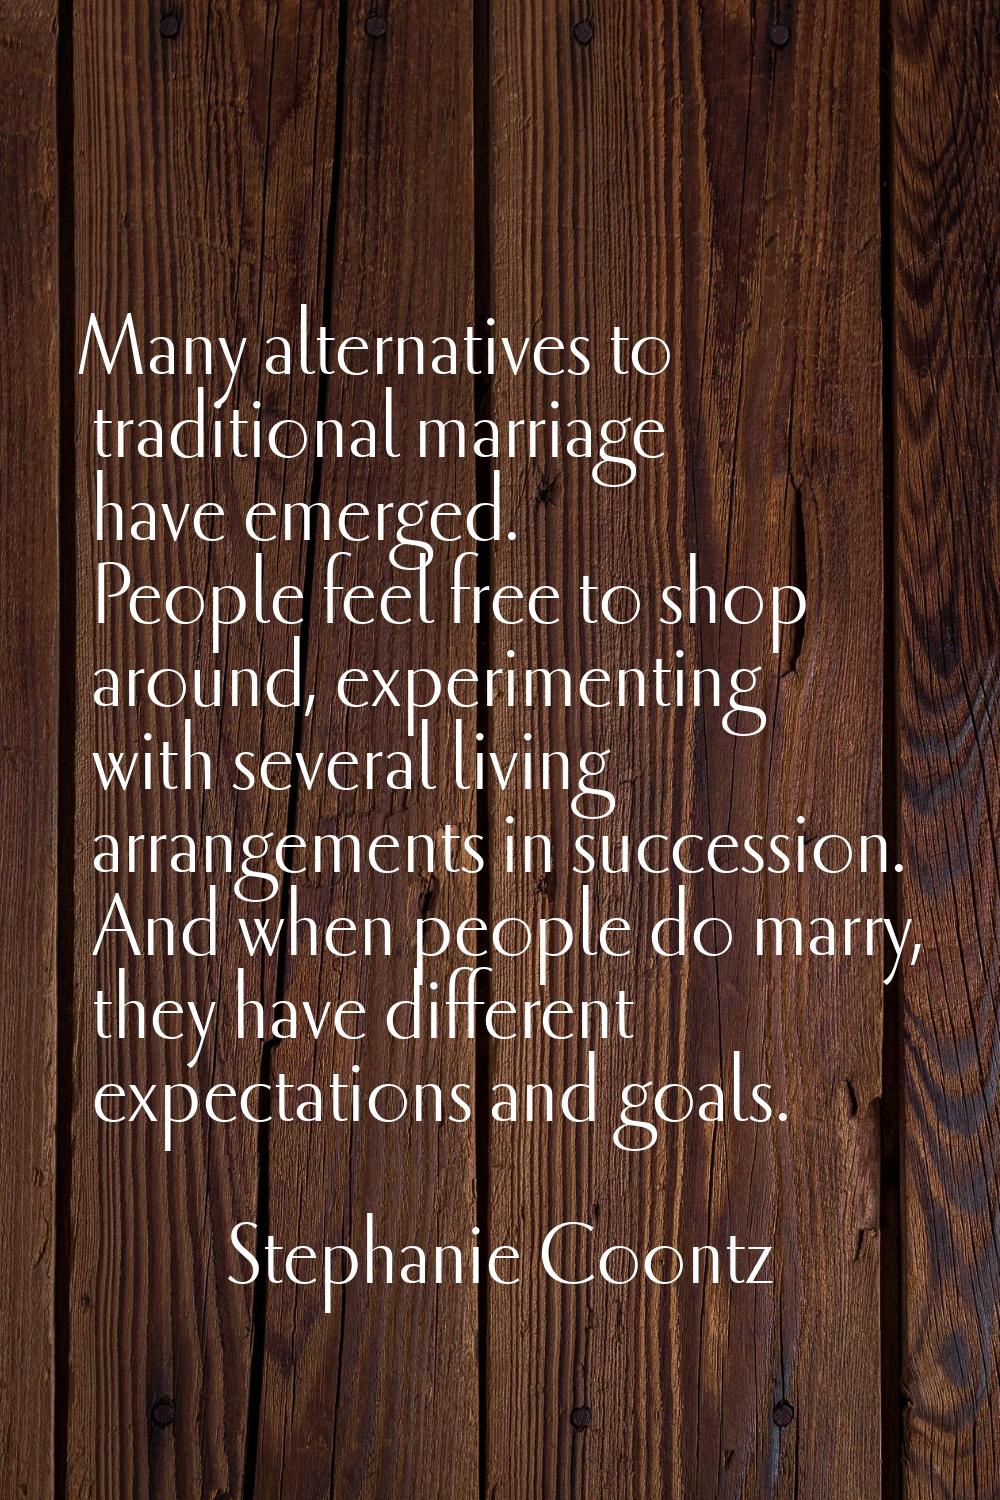 Many alternatives to traditional marriage have emerged. People feel free to shop around, experiment